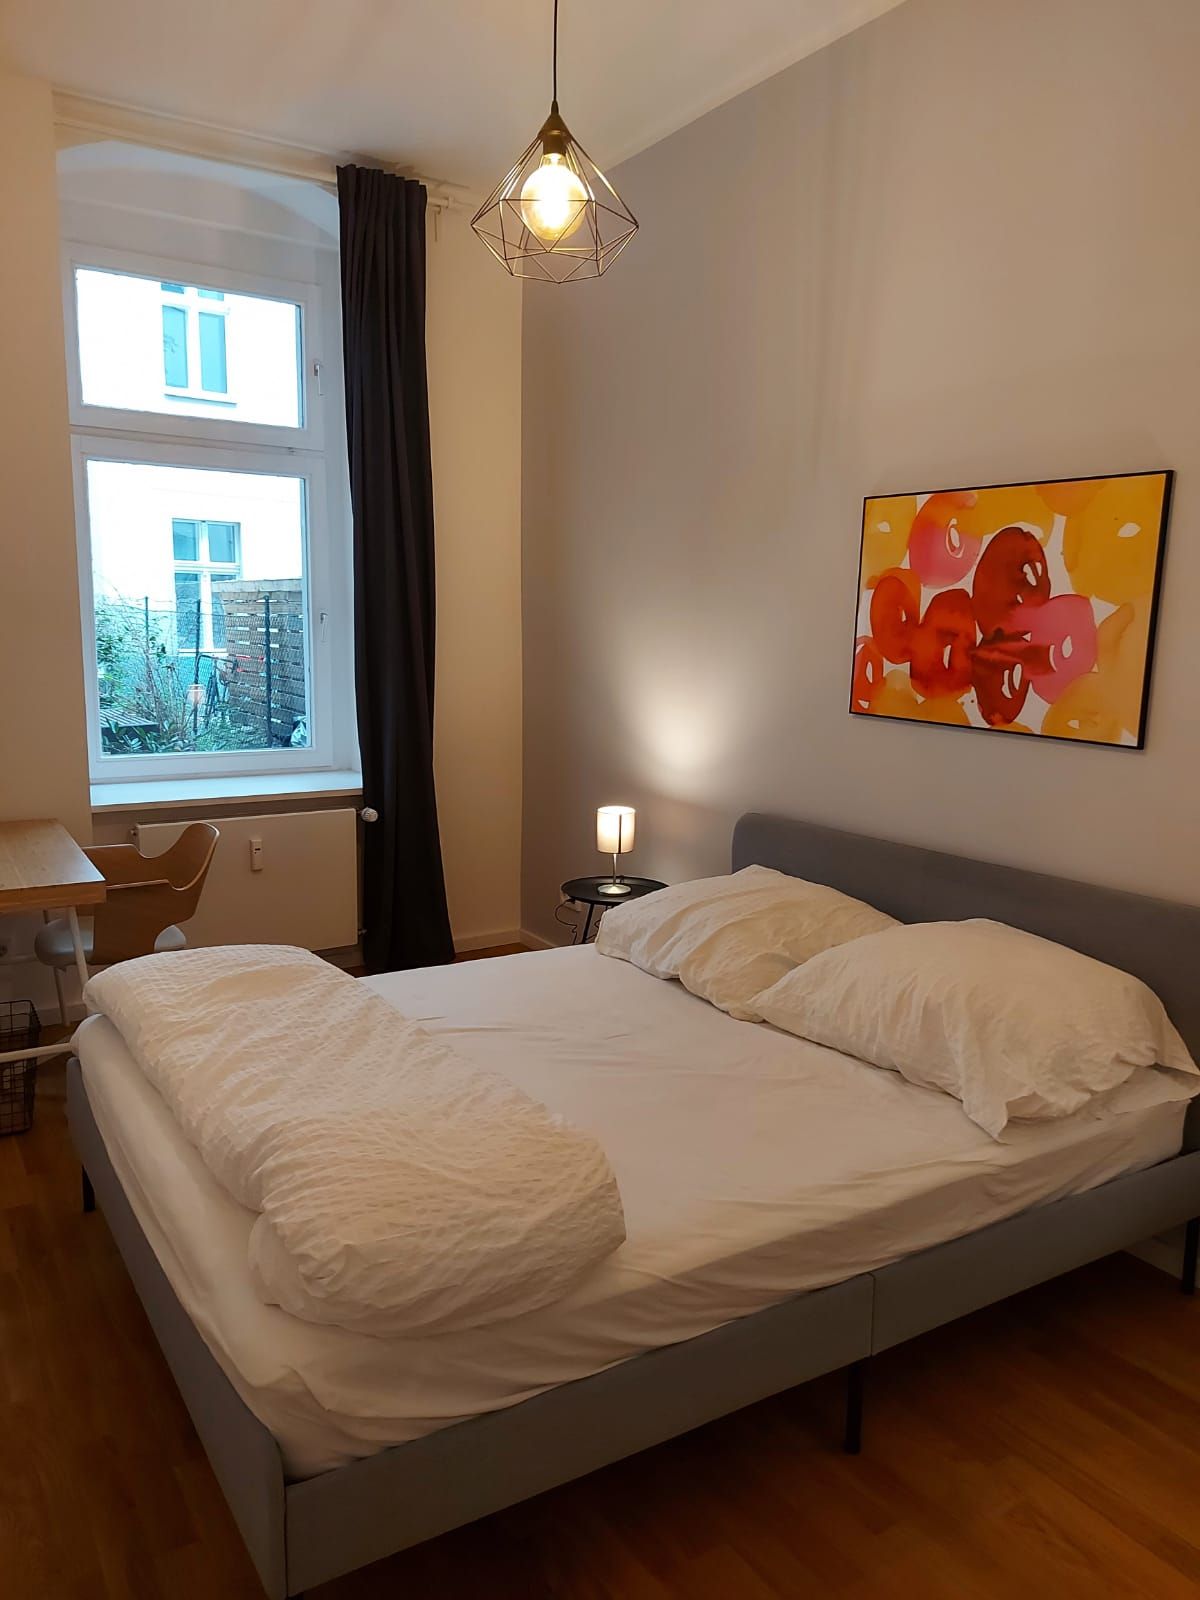 Wonderful, brand new apartment in a quiet street in the heart of Berlin